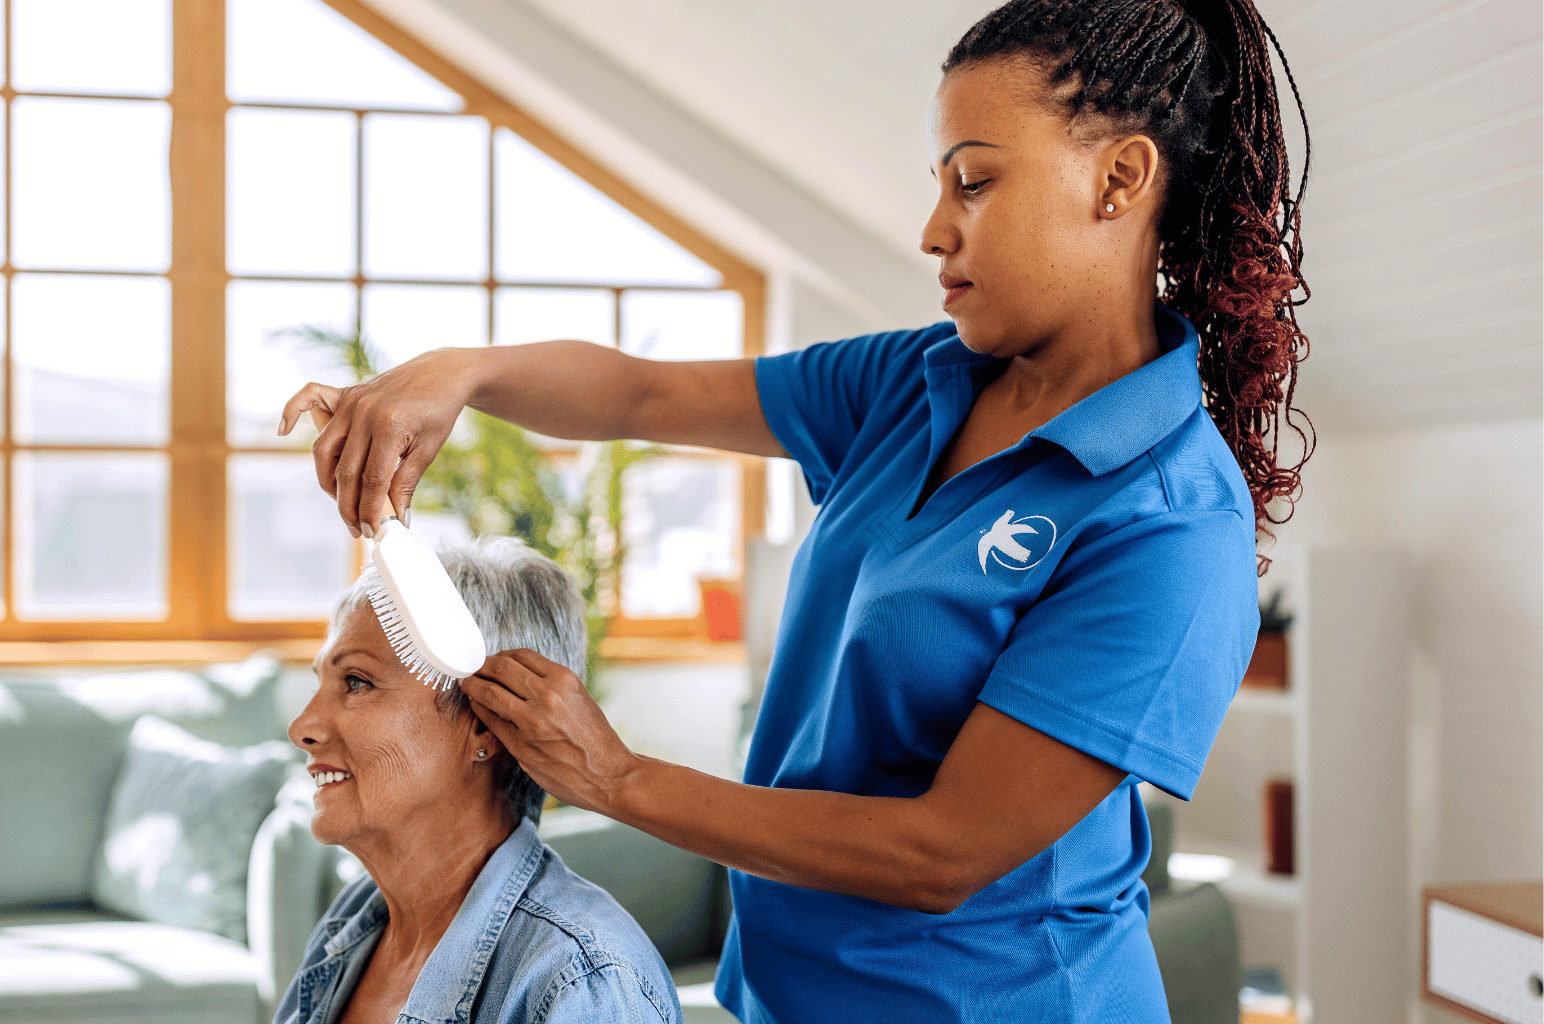 Senior Care Simplified: Costs and Advantages of Private Home Care